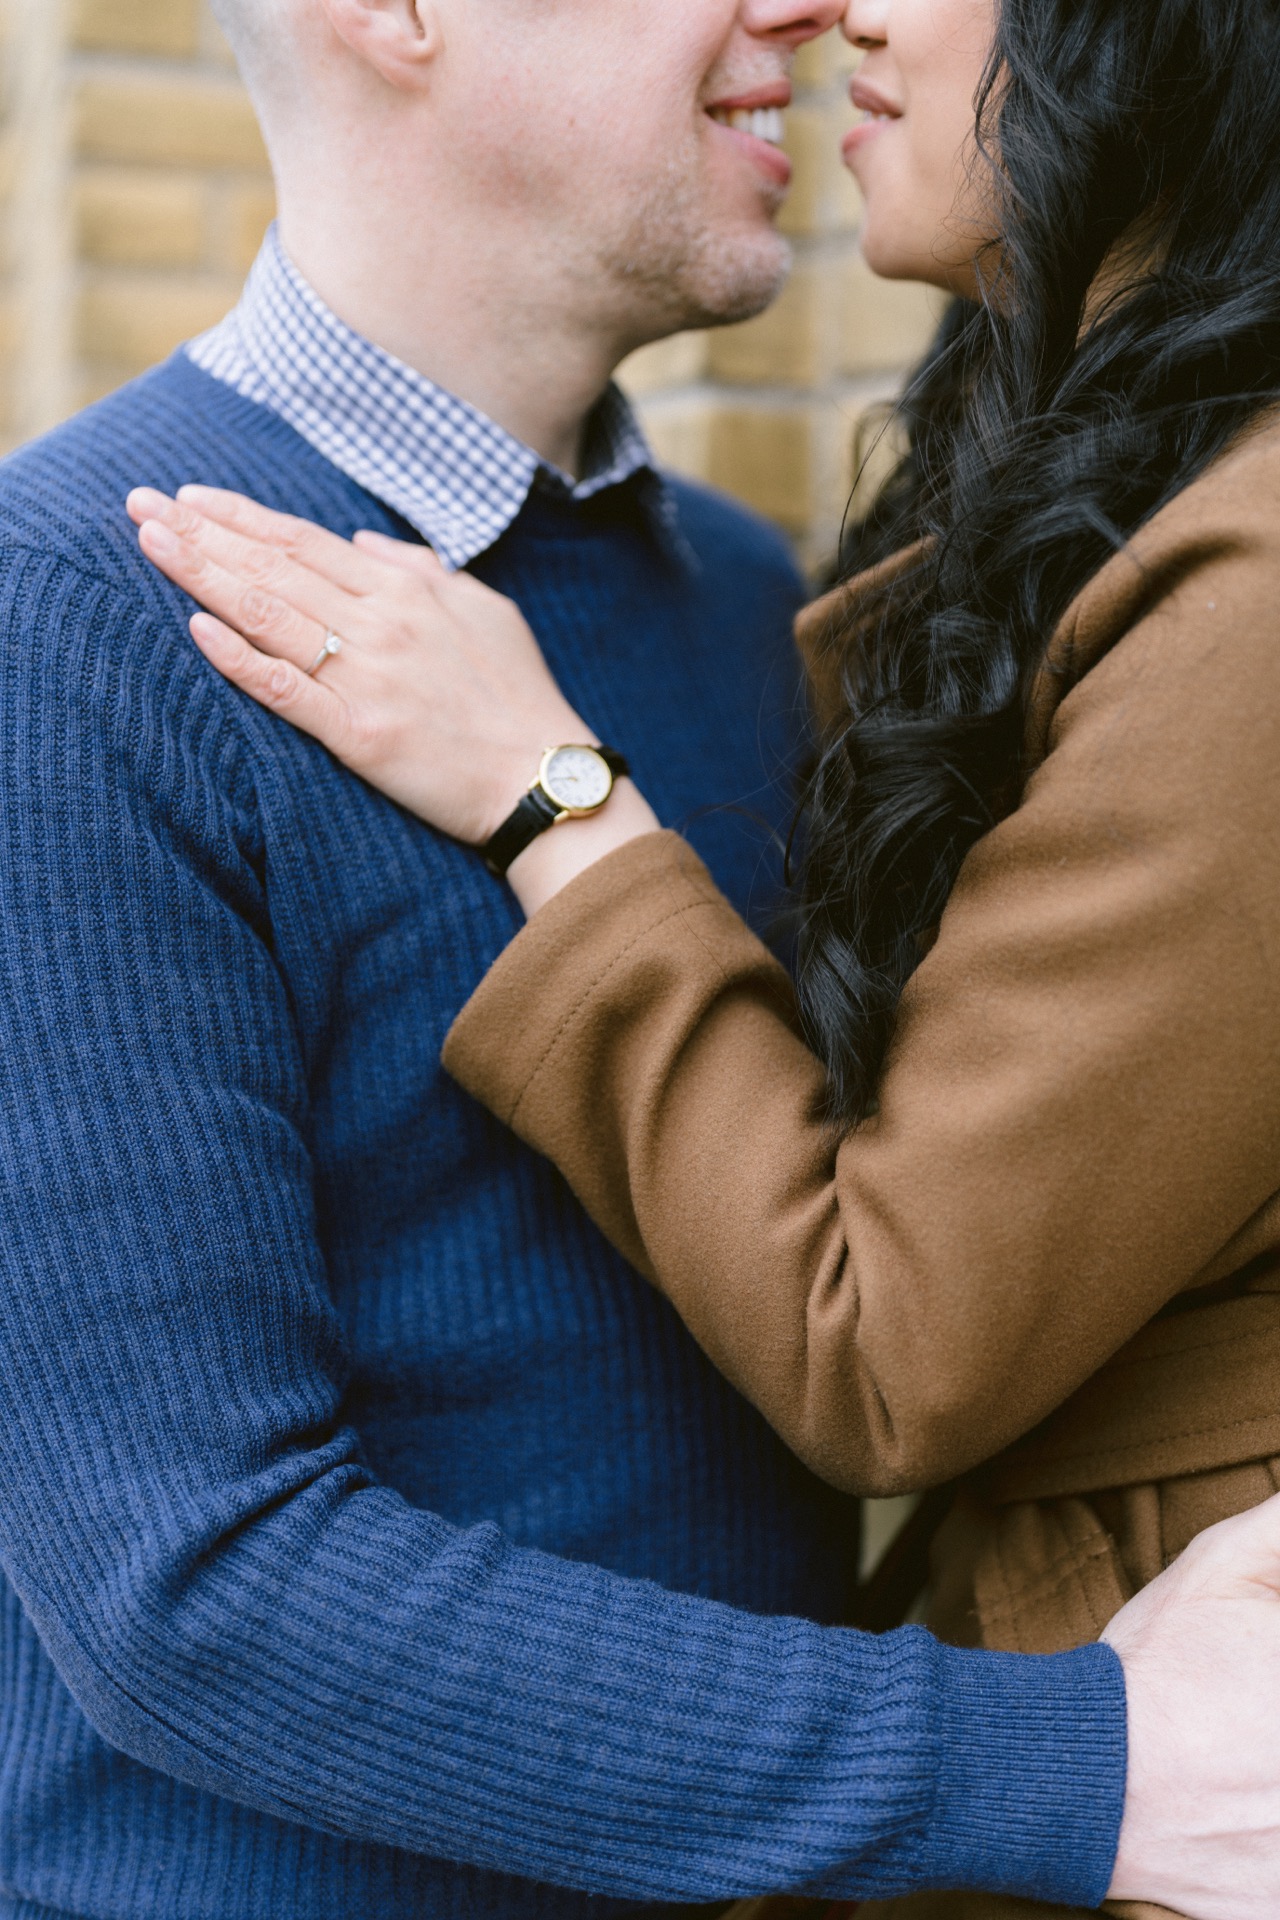 Close-up of a smiling couple embracing, focusing on their affectionate gesture.